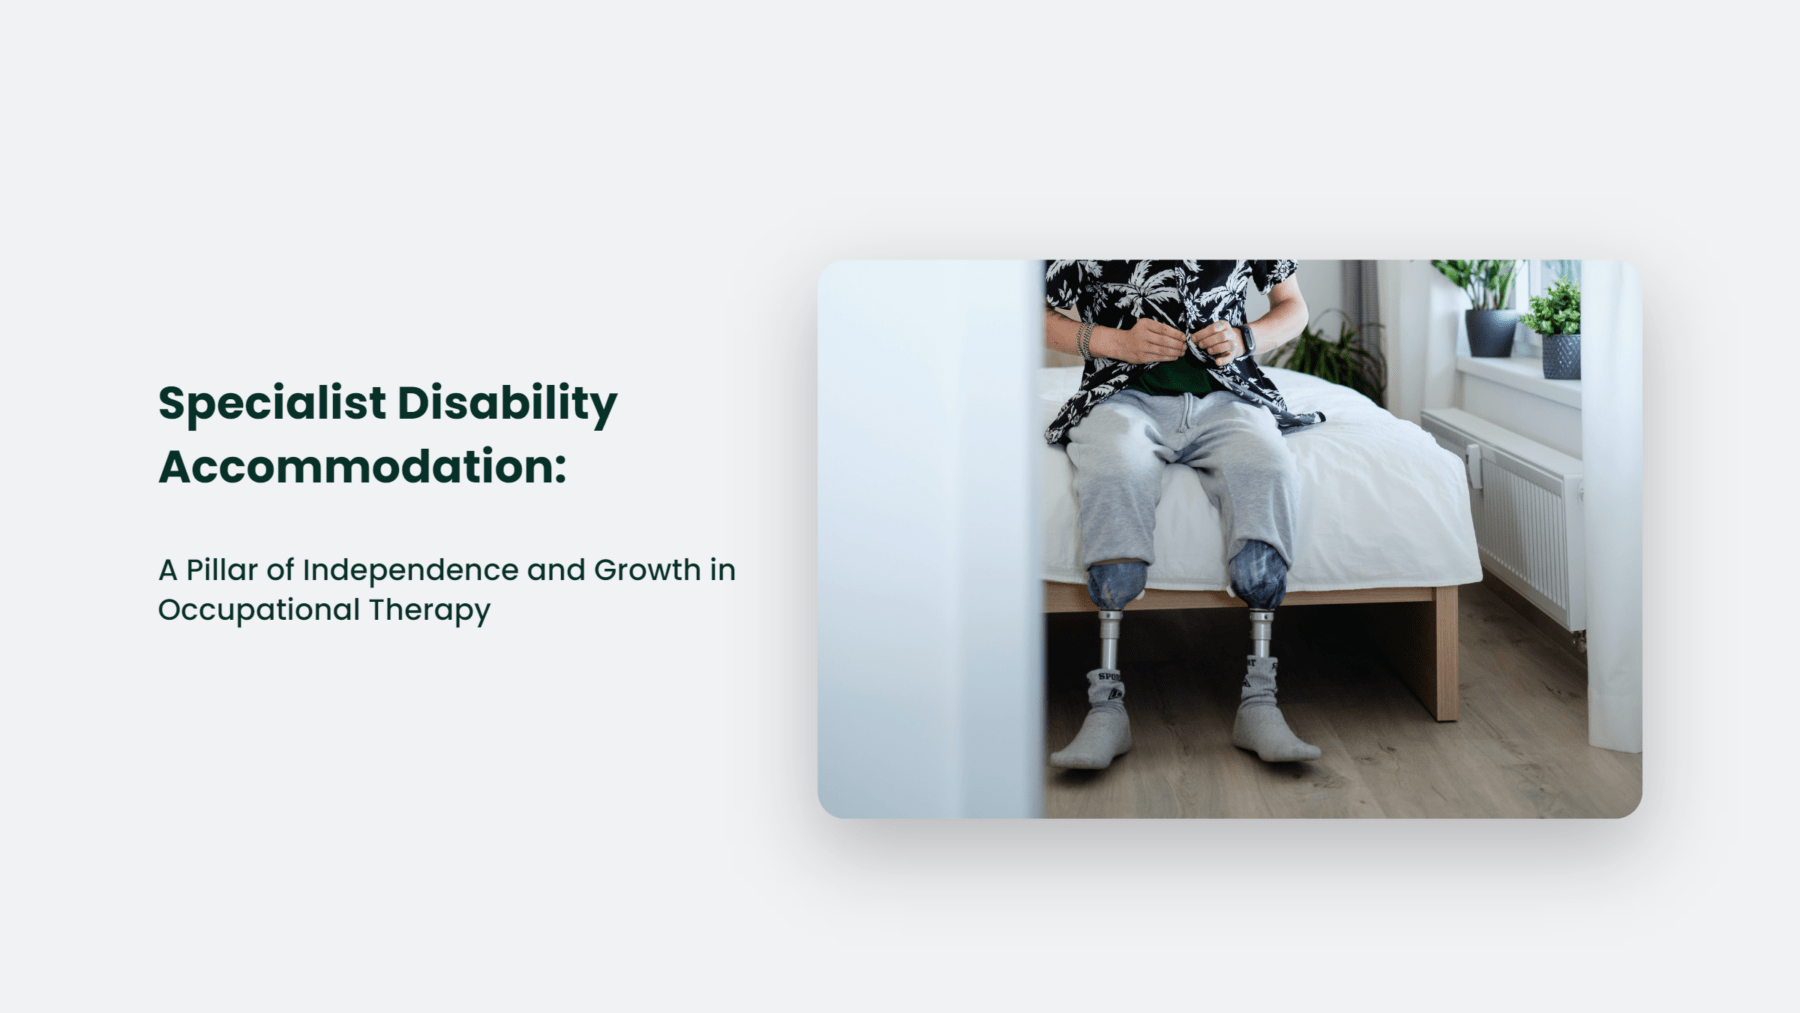 special disability accomodation Specialist Disability Accommodation: A Pillar of Independence and Growth in Occupational Therapy